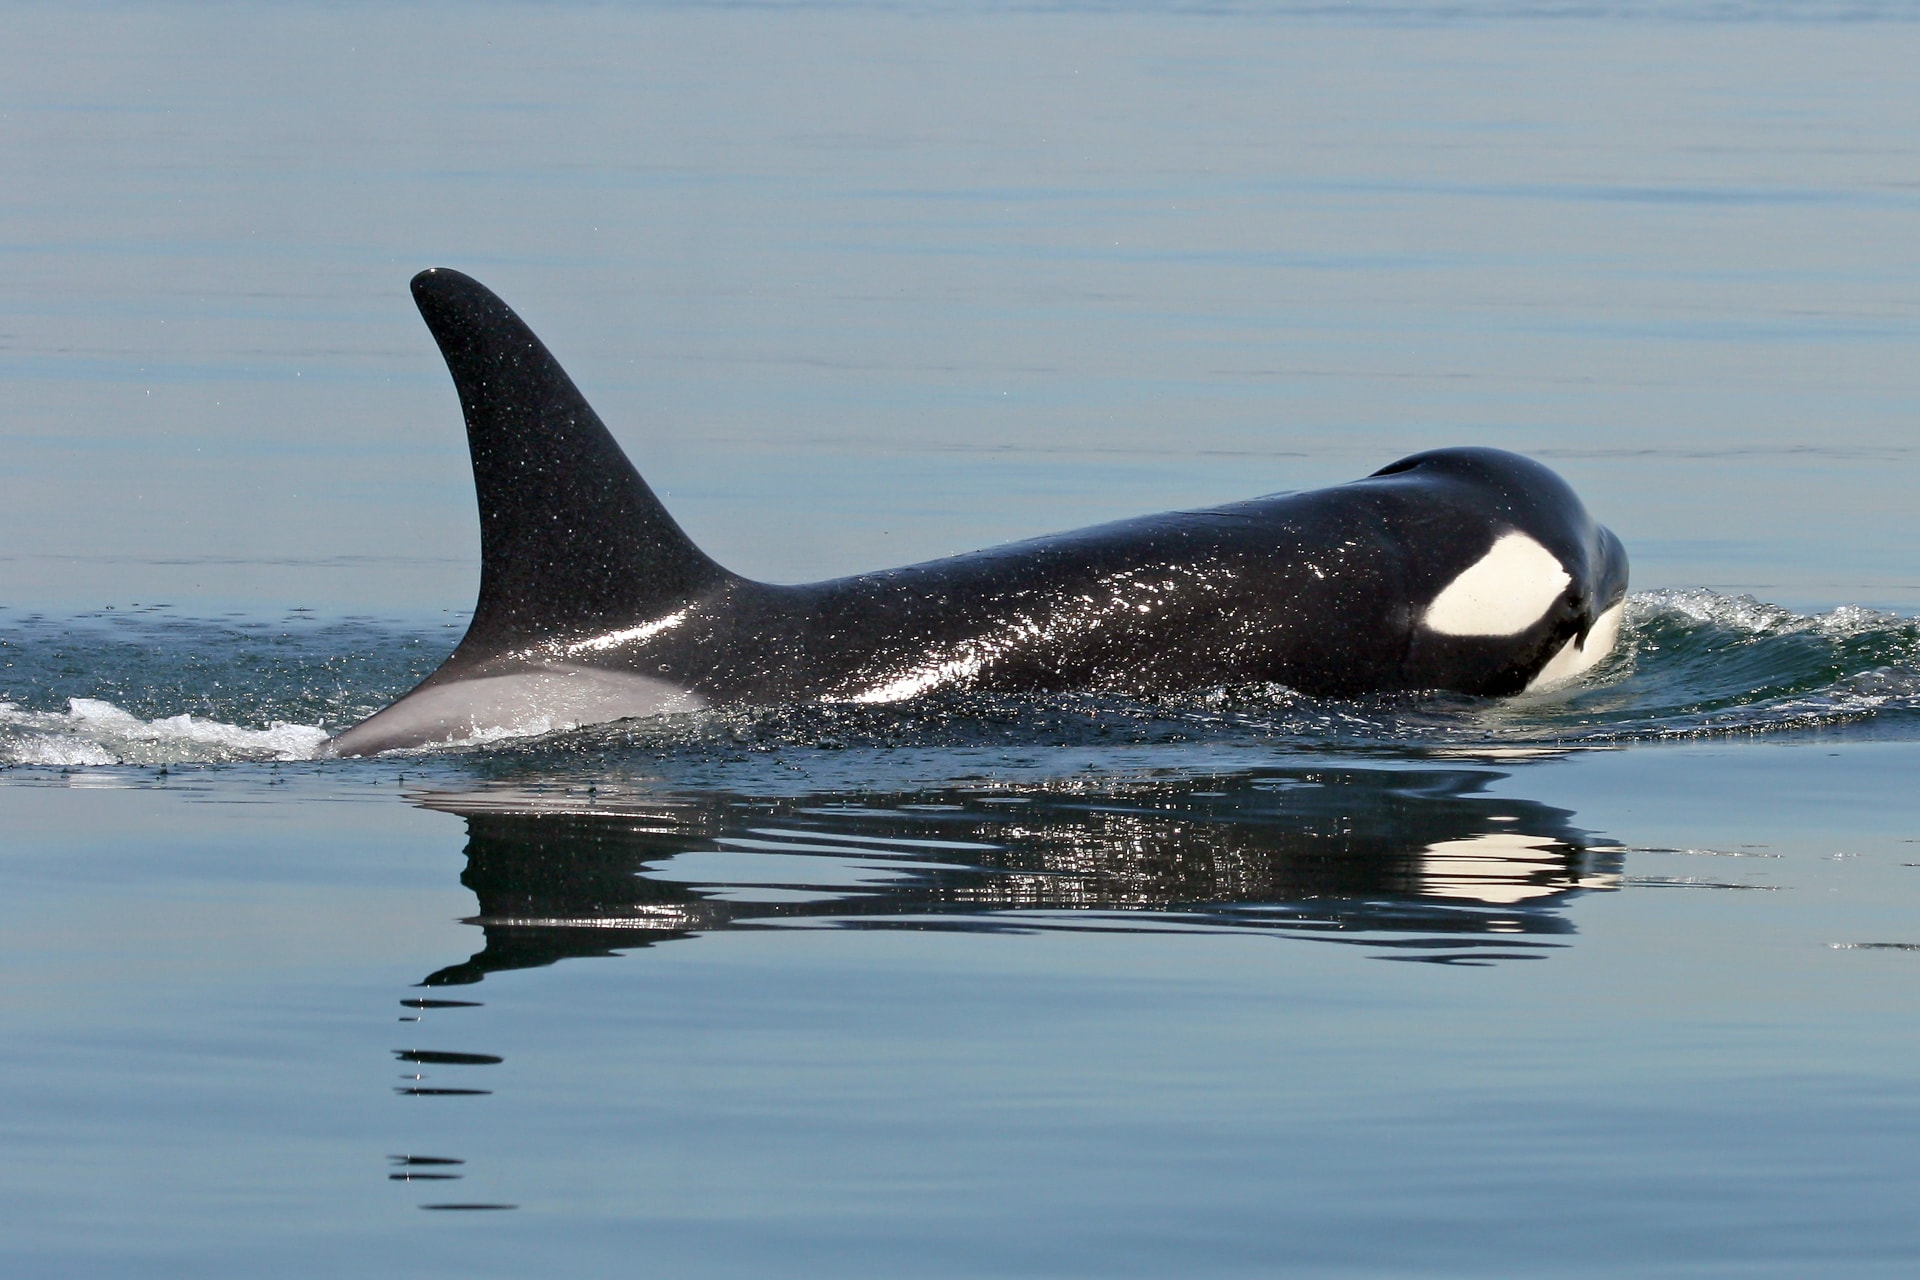 A Southern Resident killer whale surfacing.